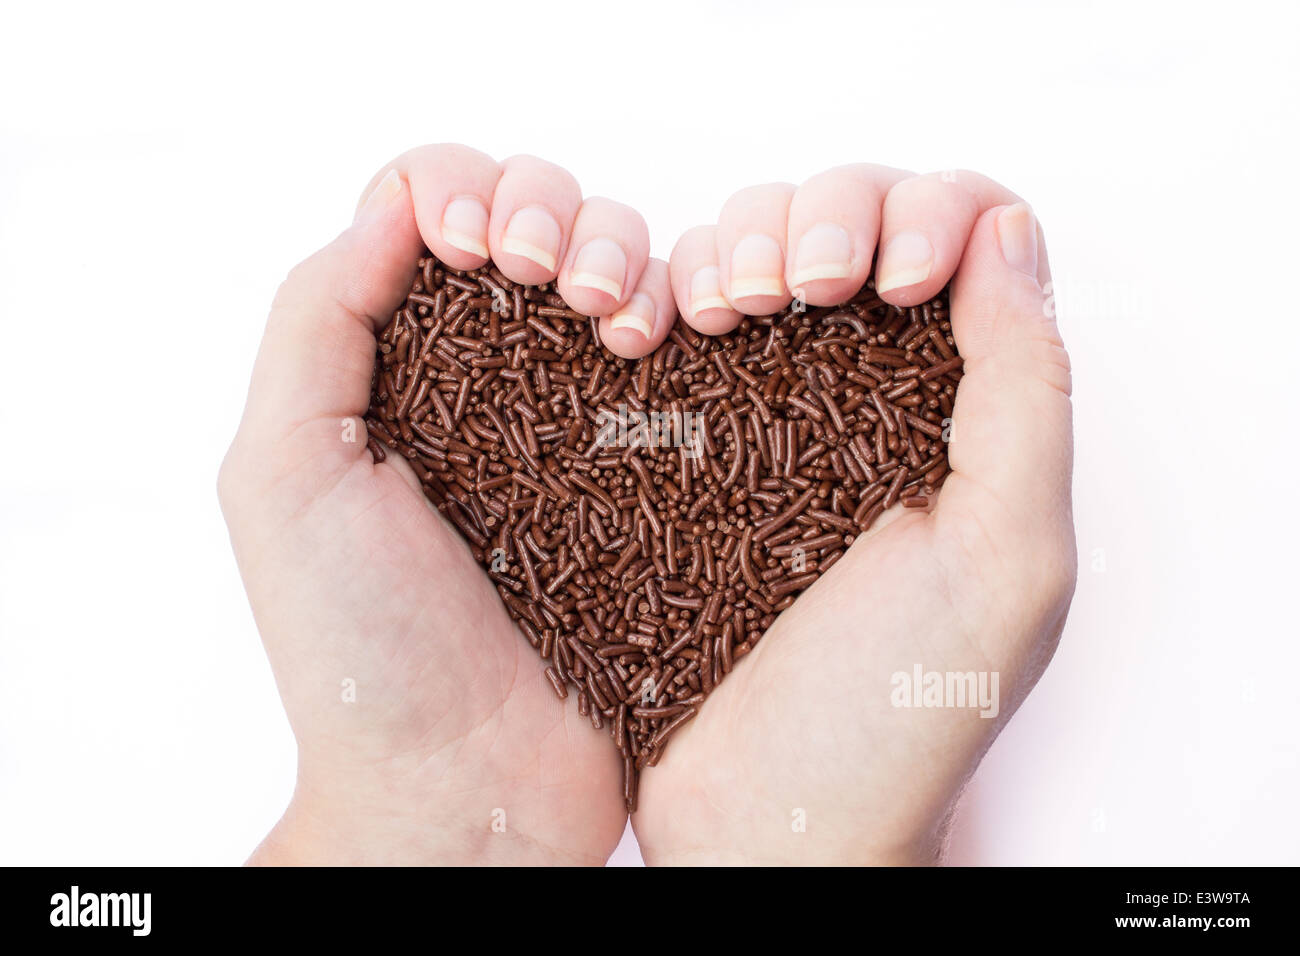 Two female hands holding chocolate sprinkles in shape of heart symbol Stock Photo